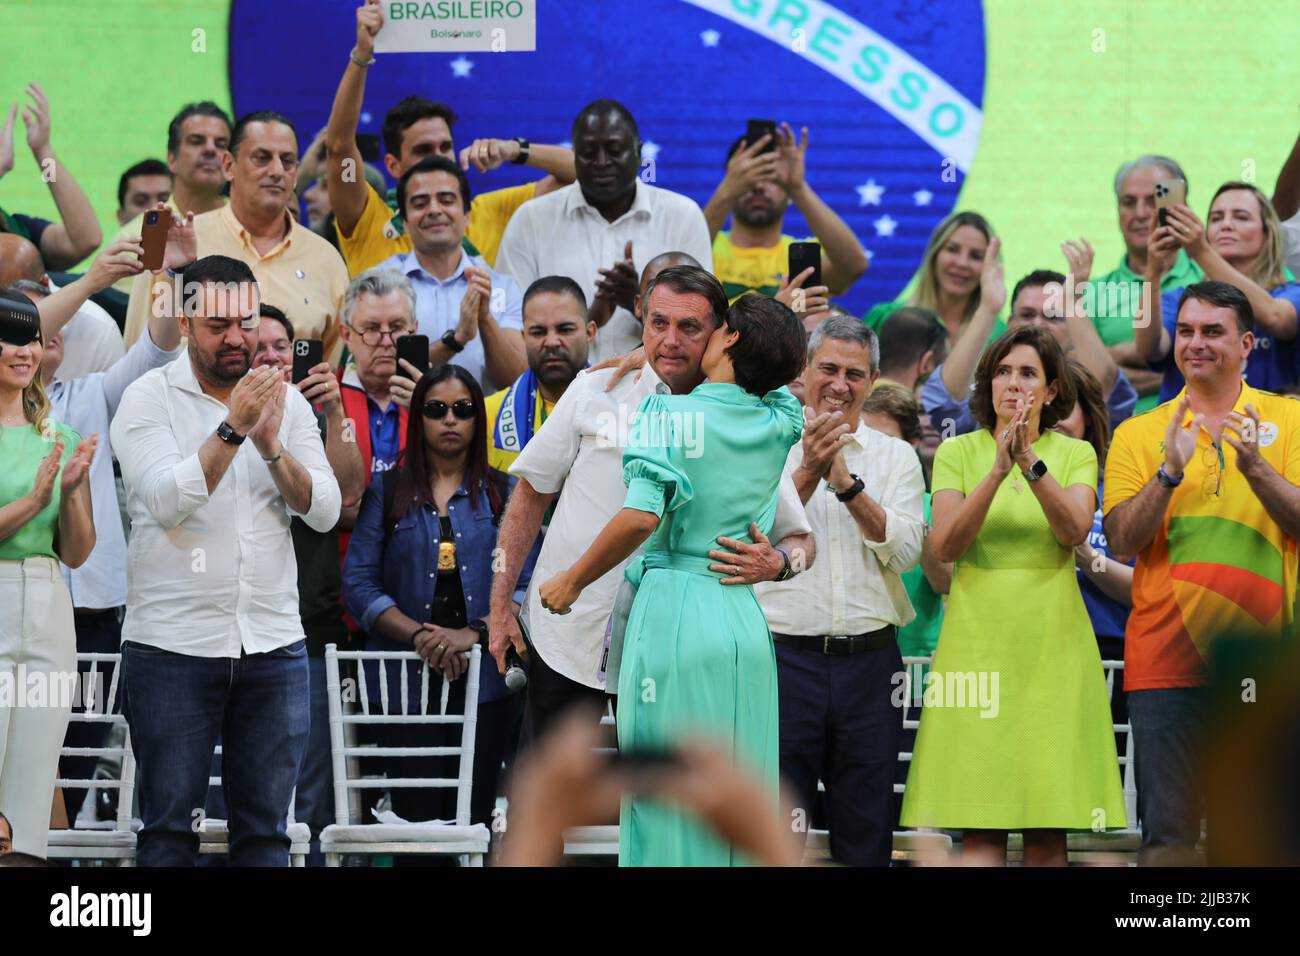 Rio De Janeiro, Brazil. 24th July, 2022. Brazilian President Jair Bolsonaro (C) hugs his wife Michelle Bolsonaro during an election rally in Rio de Janeiro, Brazil, on July 24, 2022. Brazilian President Jair Bolsonaro on Sunday officially announced his intent to seek re-election and named Walter Souza Braga Netto, the former Brazil's Minister of Defense, as his intended vice president. Credit: Wang Tiancong/Xinhua/Alamy Live News Stock Photo